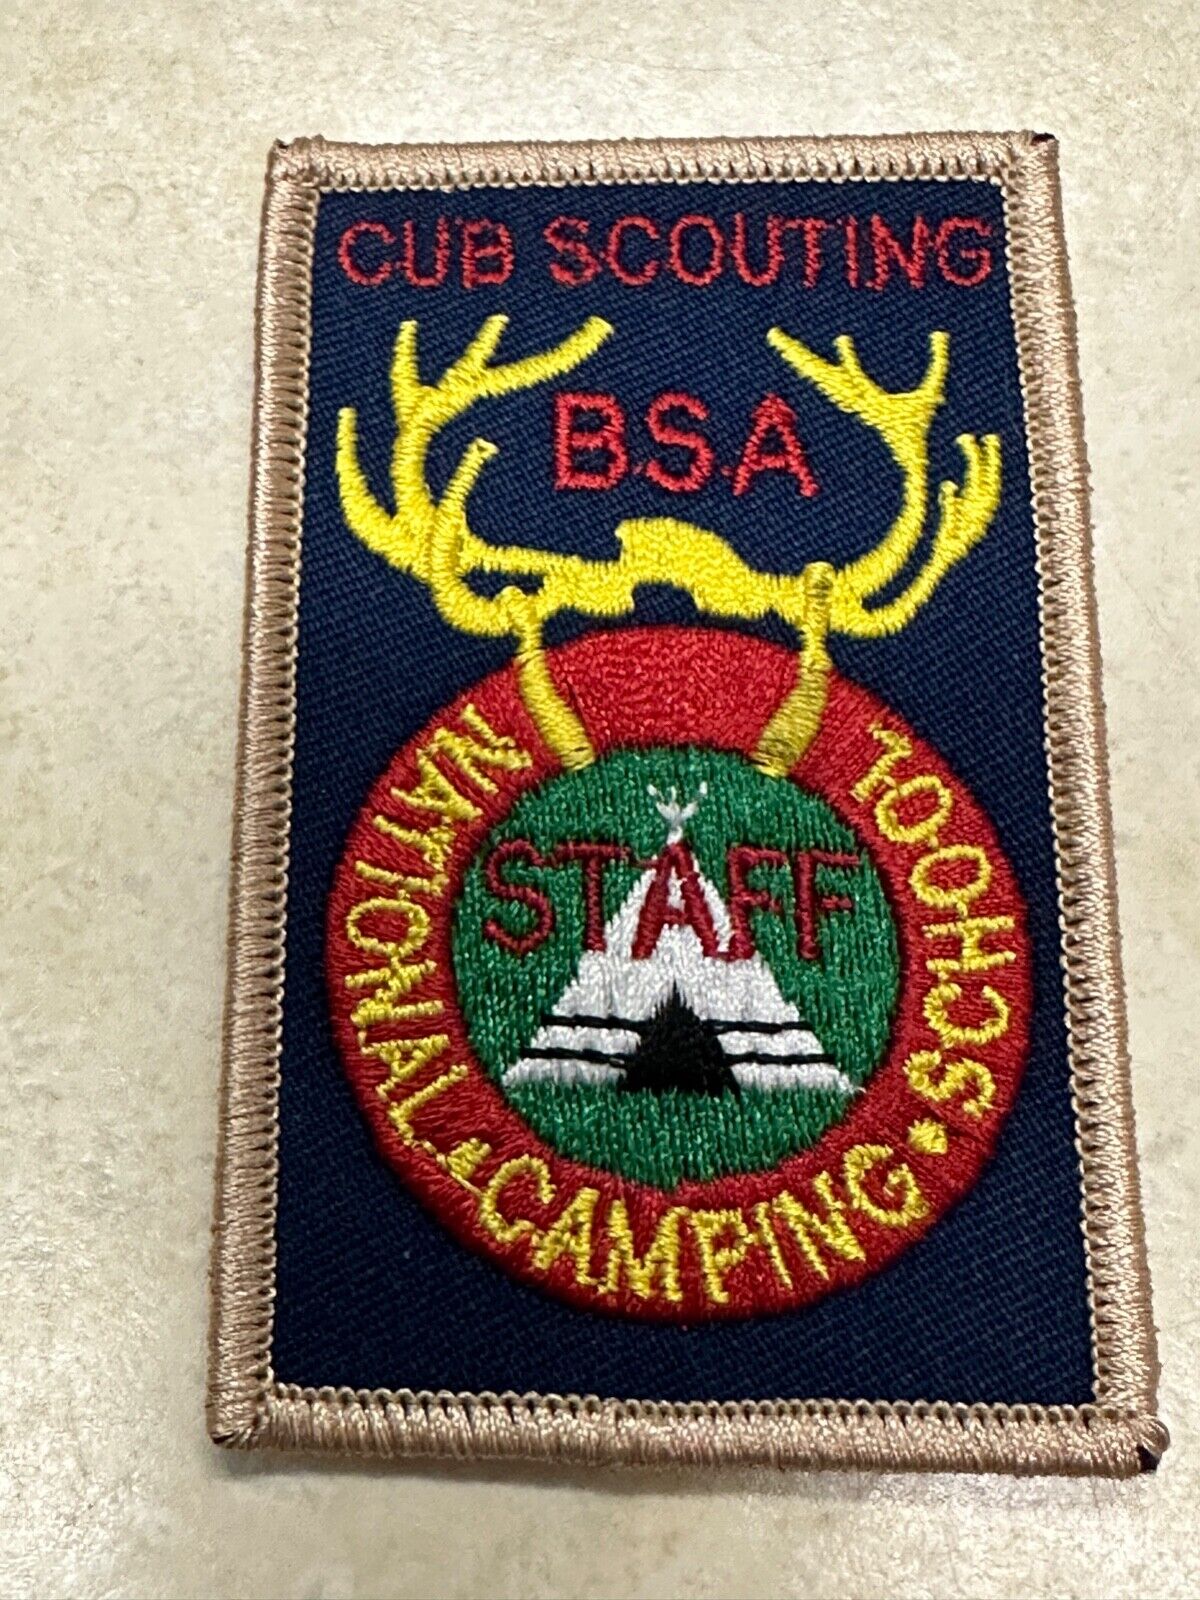 National Camping School Cub Scouting Staff Patch